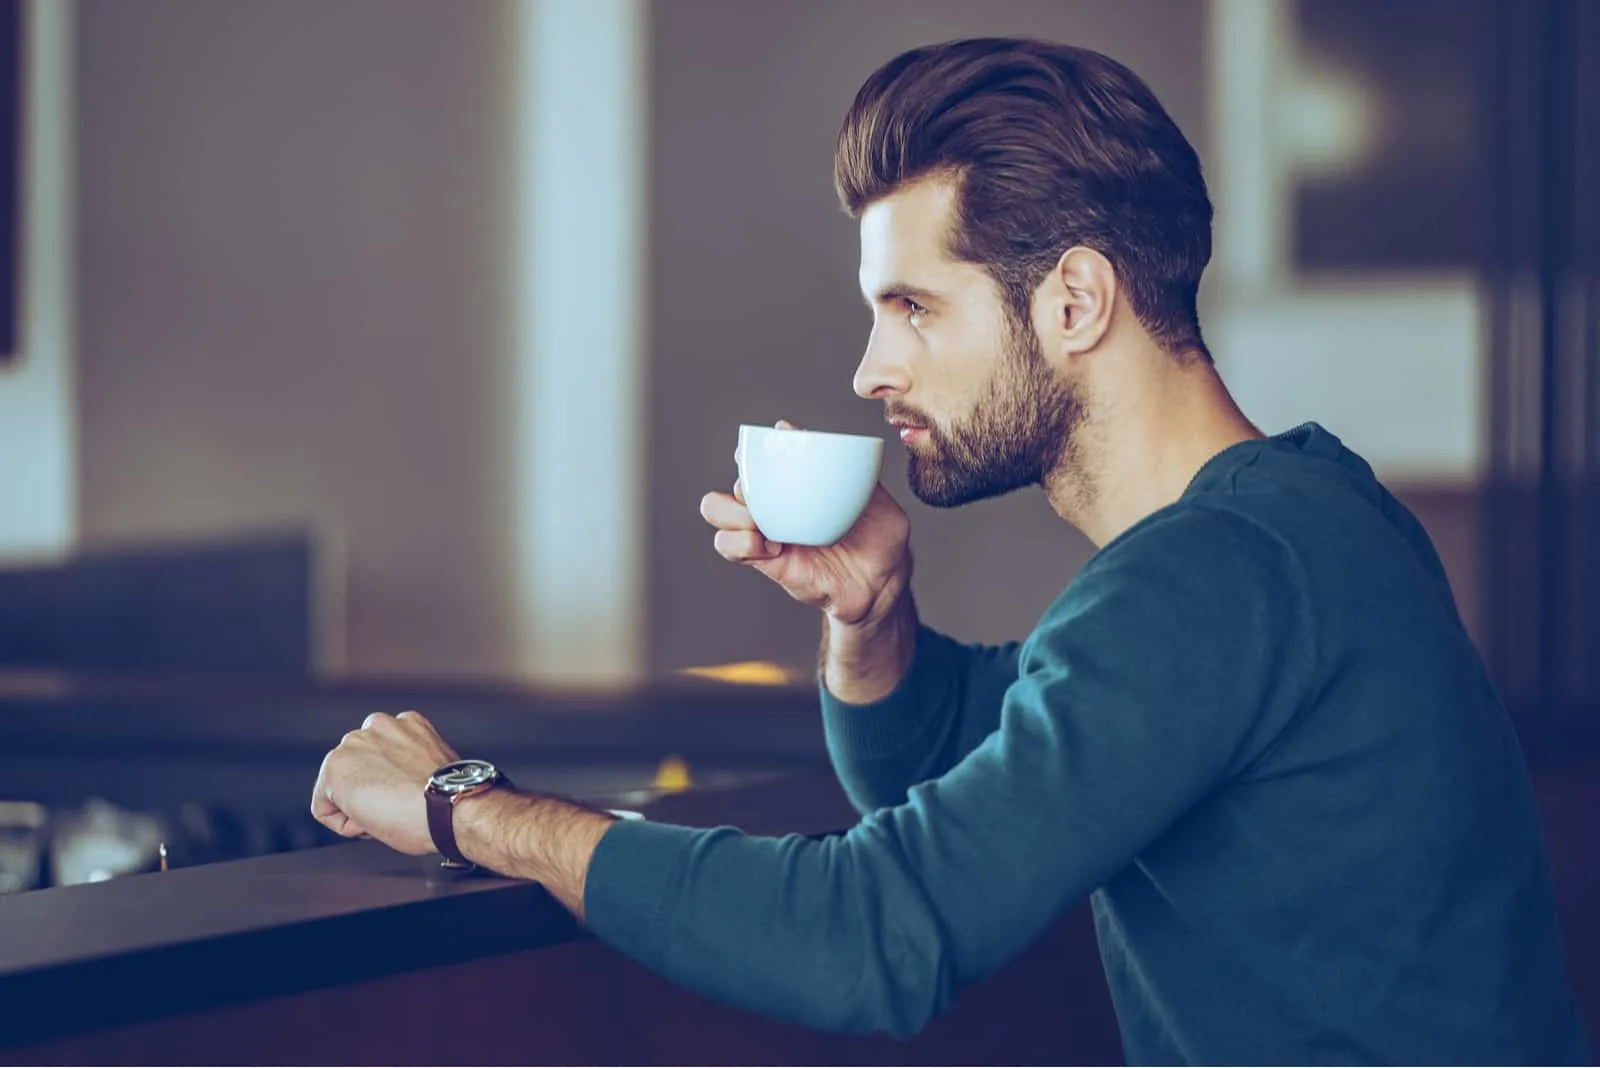 an imaginary man sits and drinks coffee